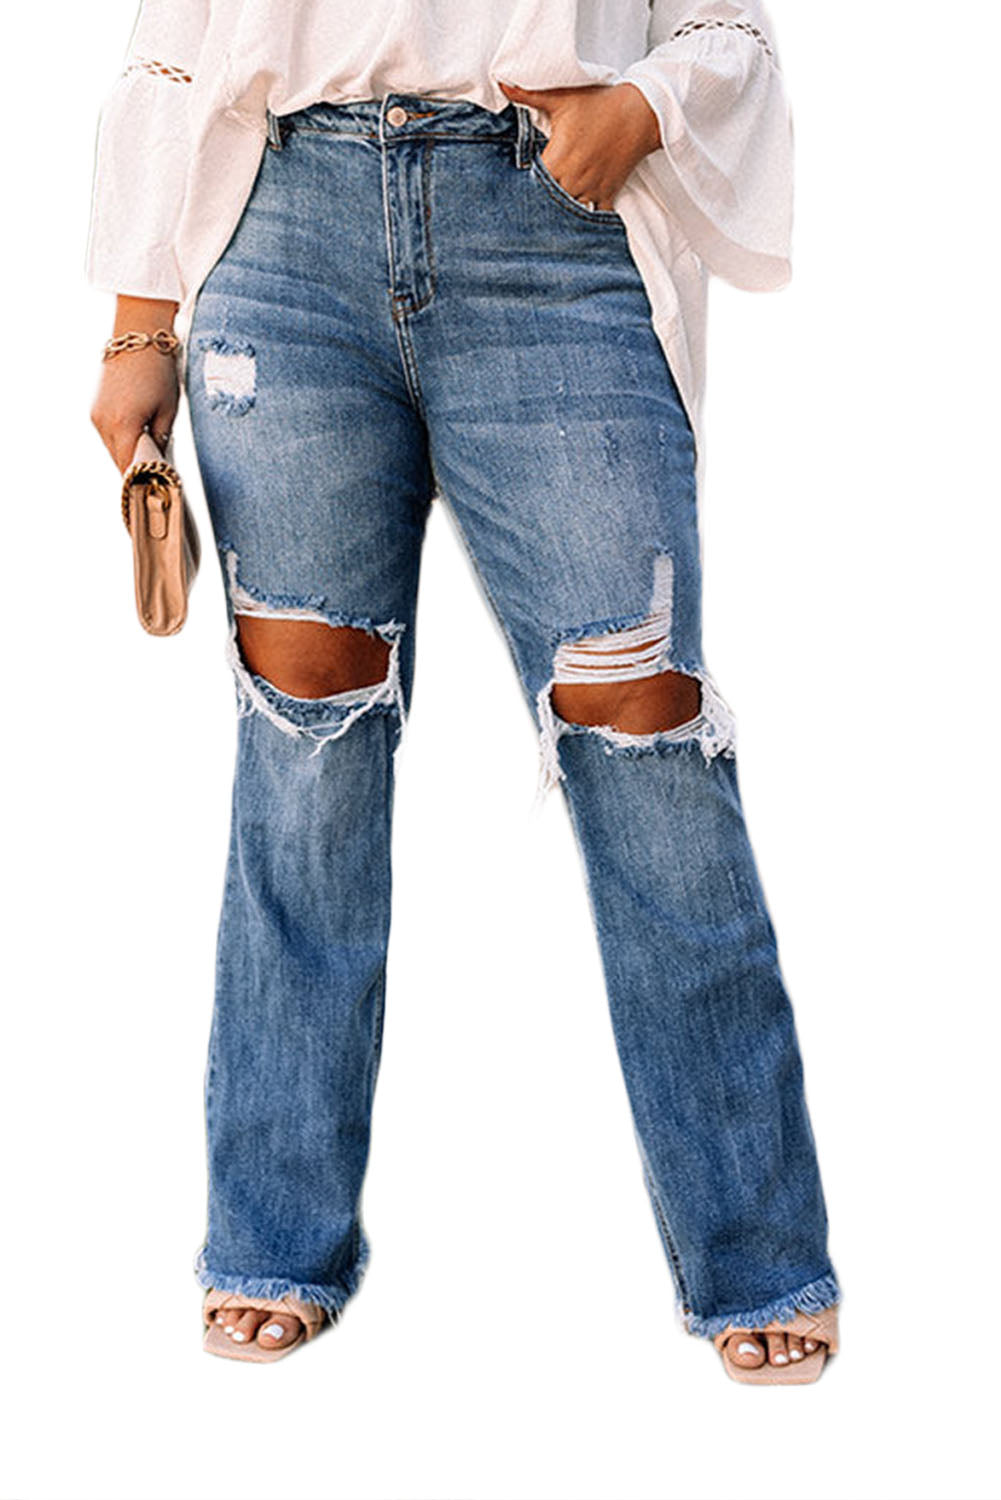 - Blue Dark Wash Raw Hem High Waisted Voluptuous (+) Plus Size Ripped Women's Denim Jeans - Plus Size Jeans at TFC&H Co.